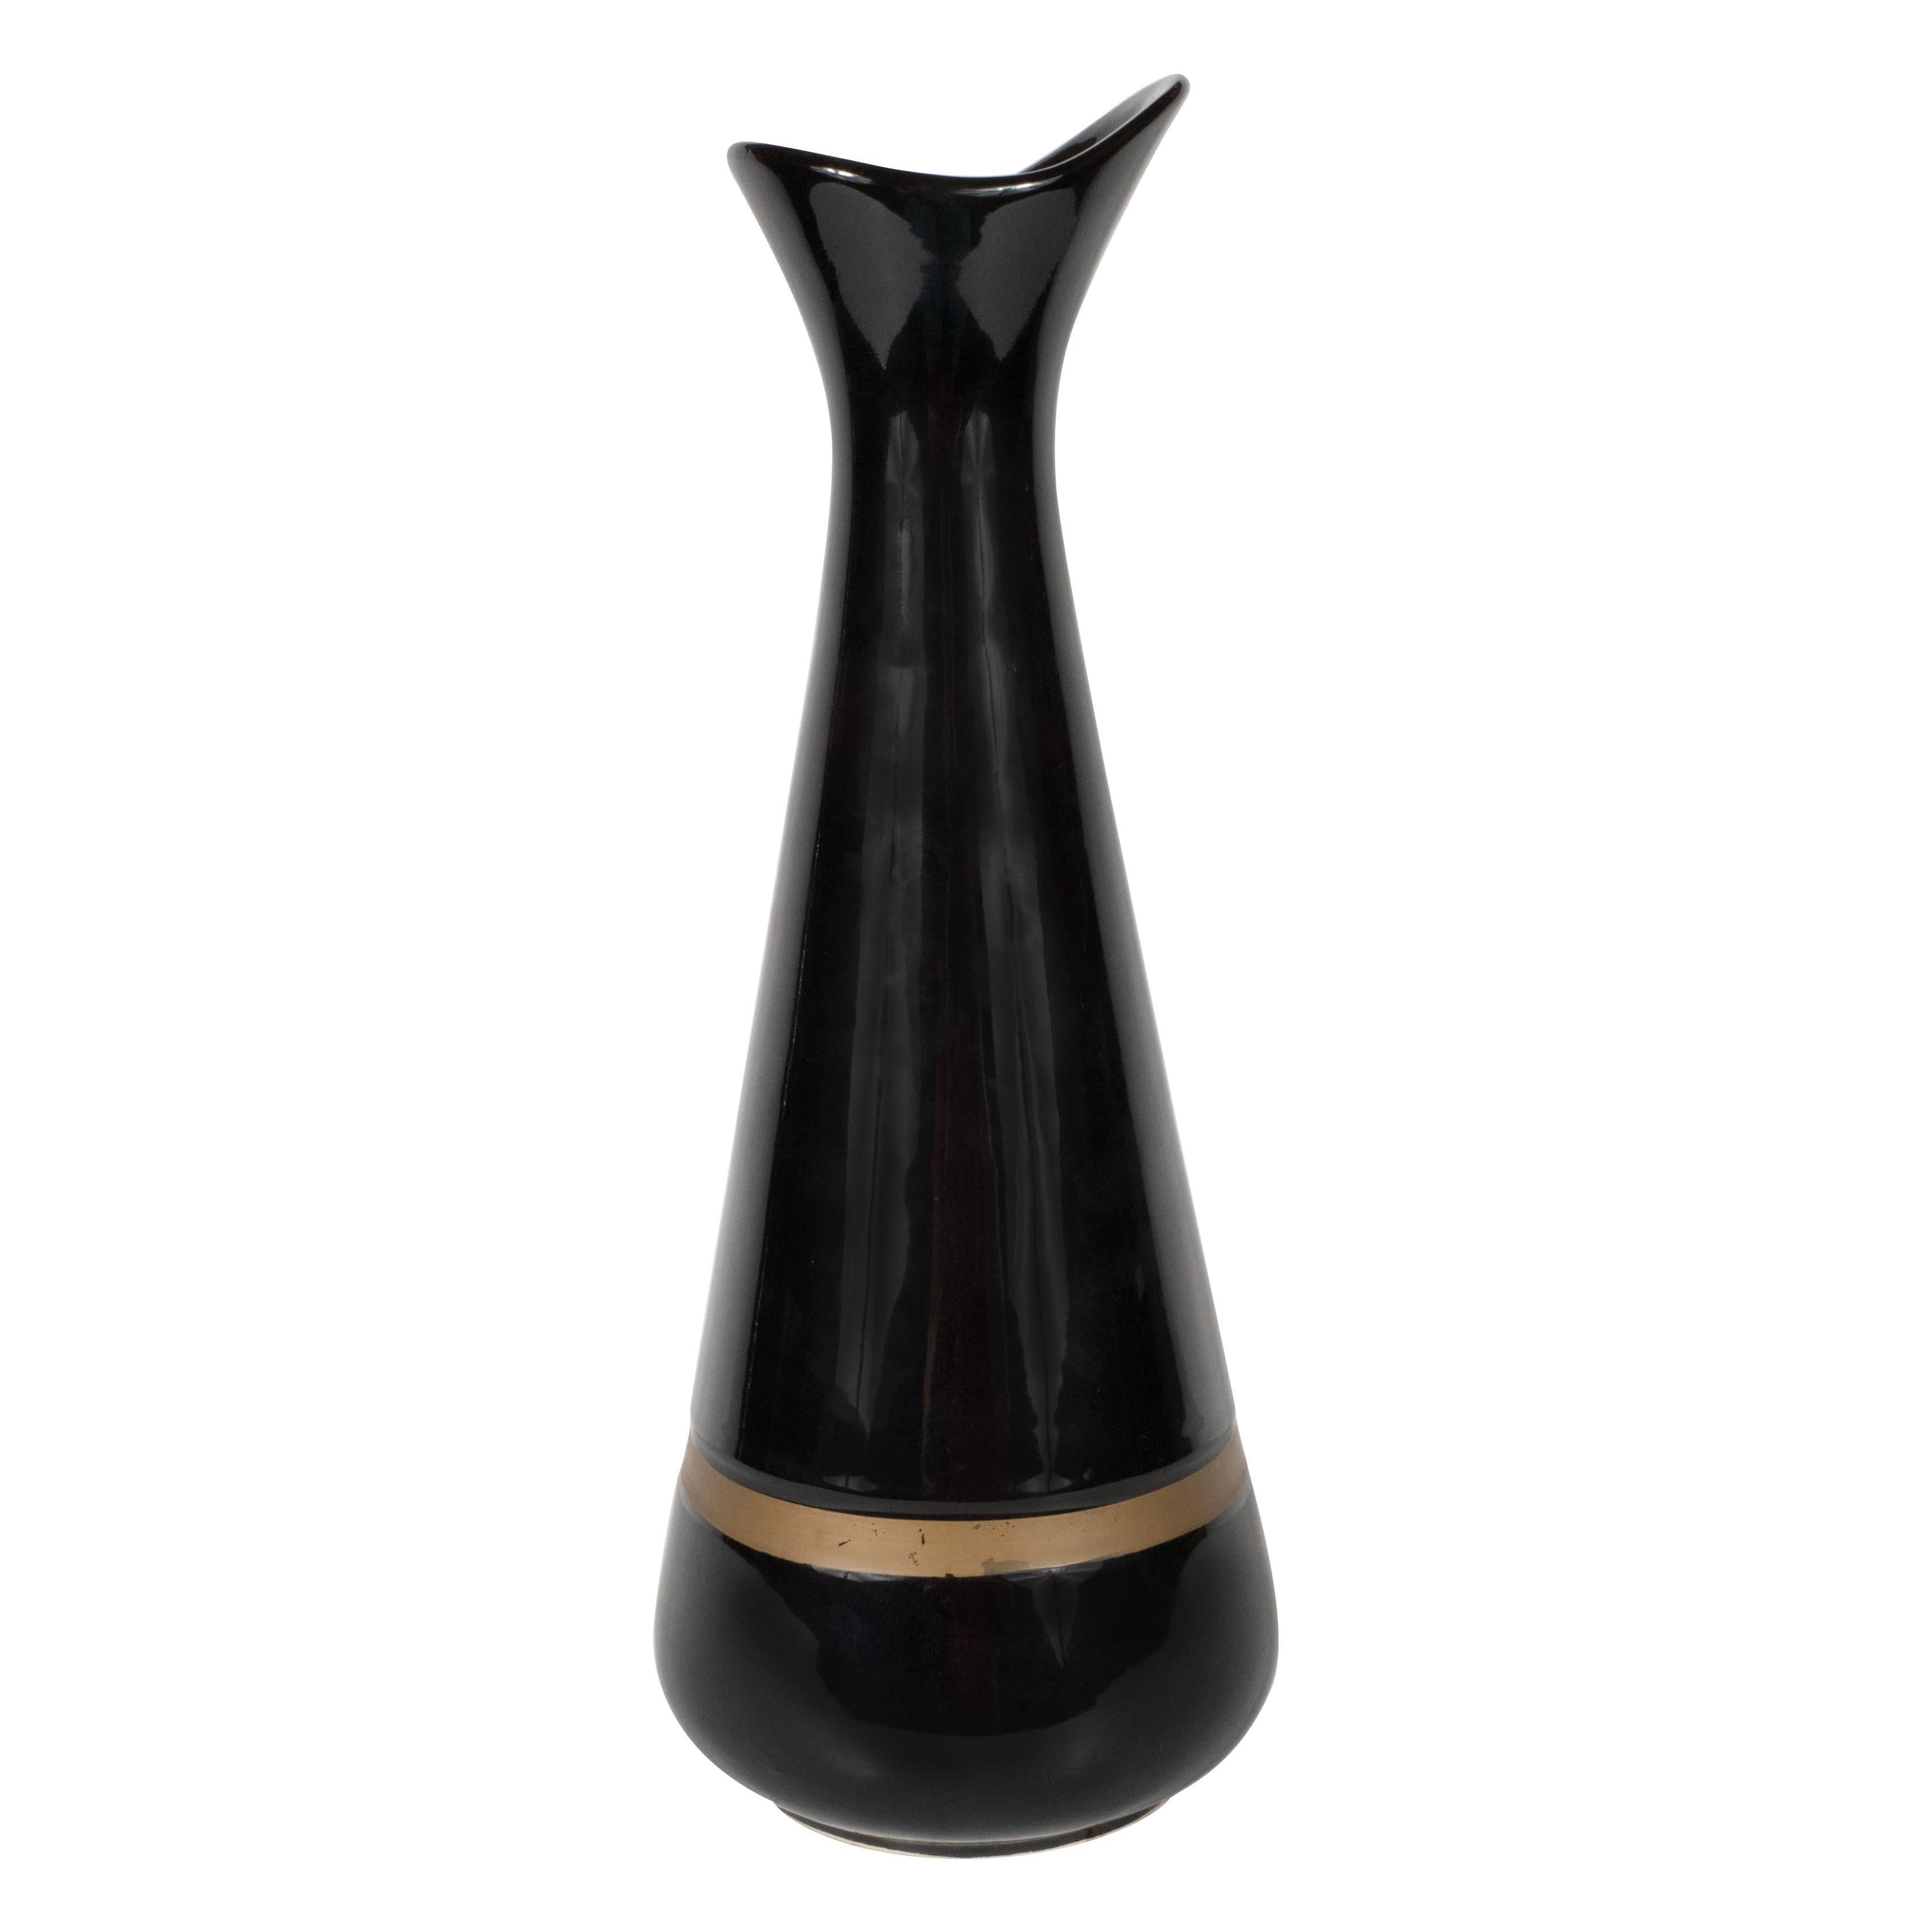 Mid-Century Modernist Hourglass Black Ceramic Vase with Gold Band, Hull Pottery